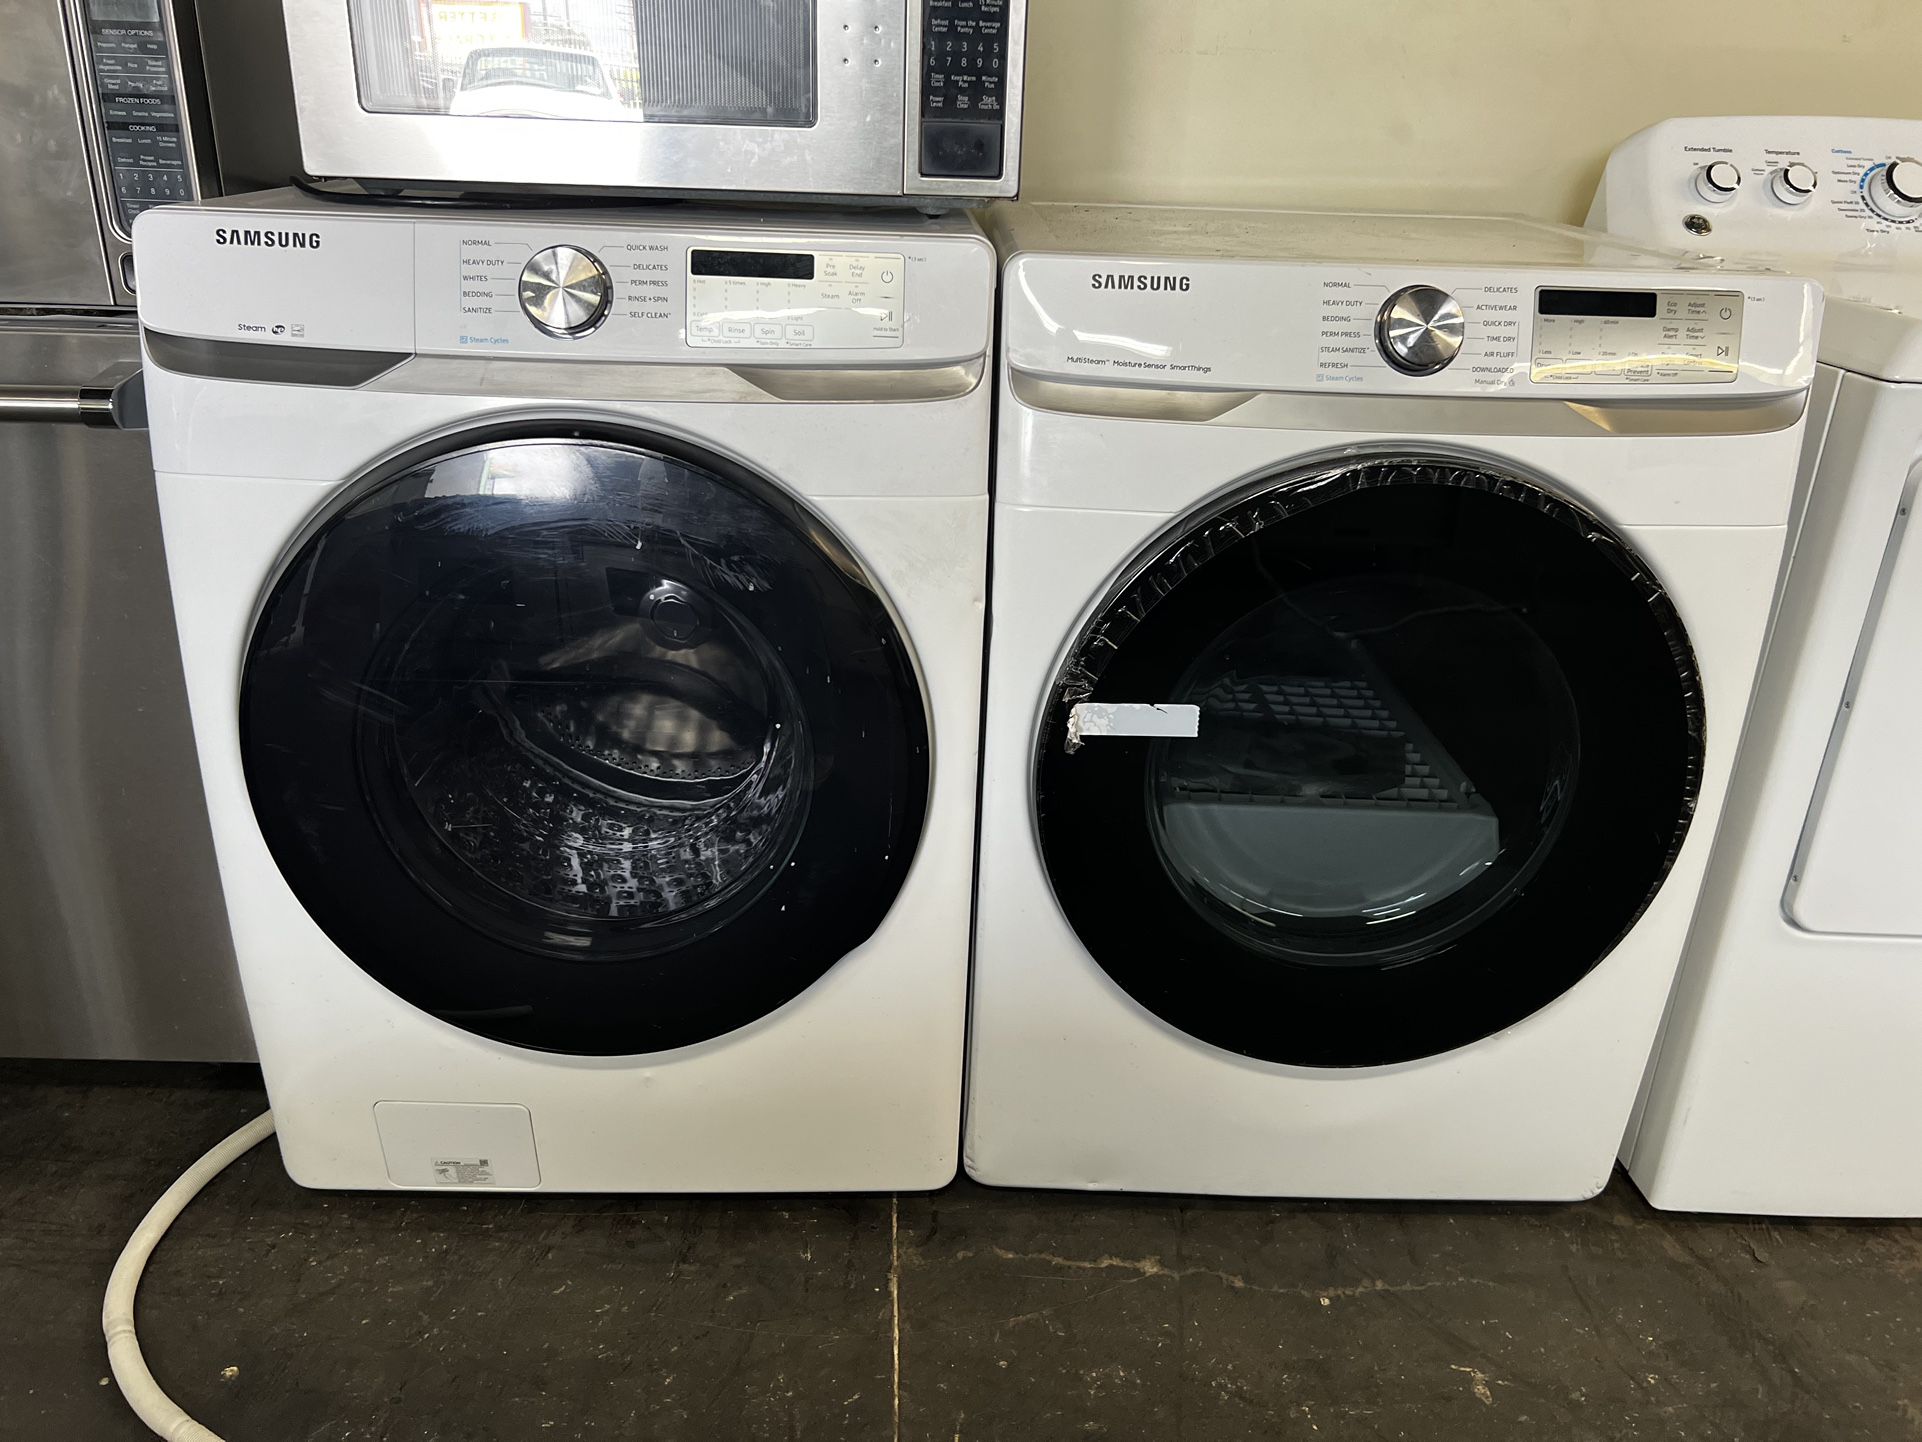 Samsung He Front Load Washer And New Open Box Samsung Gas Dryer Set 